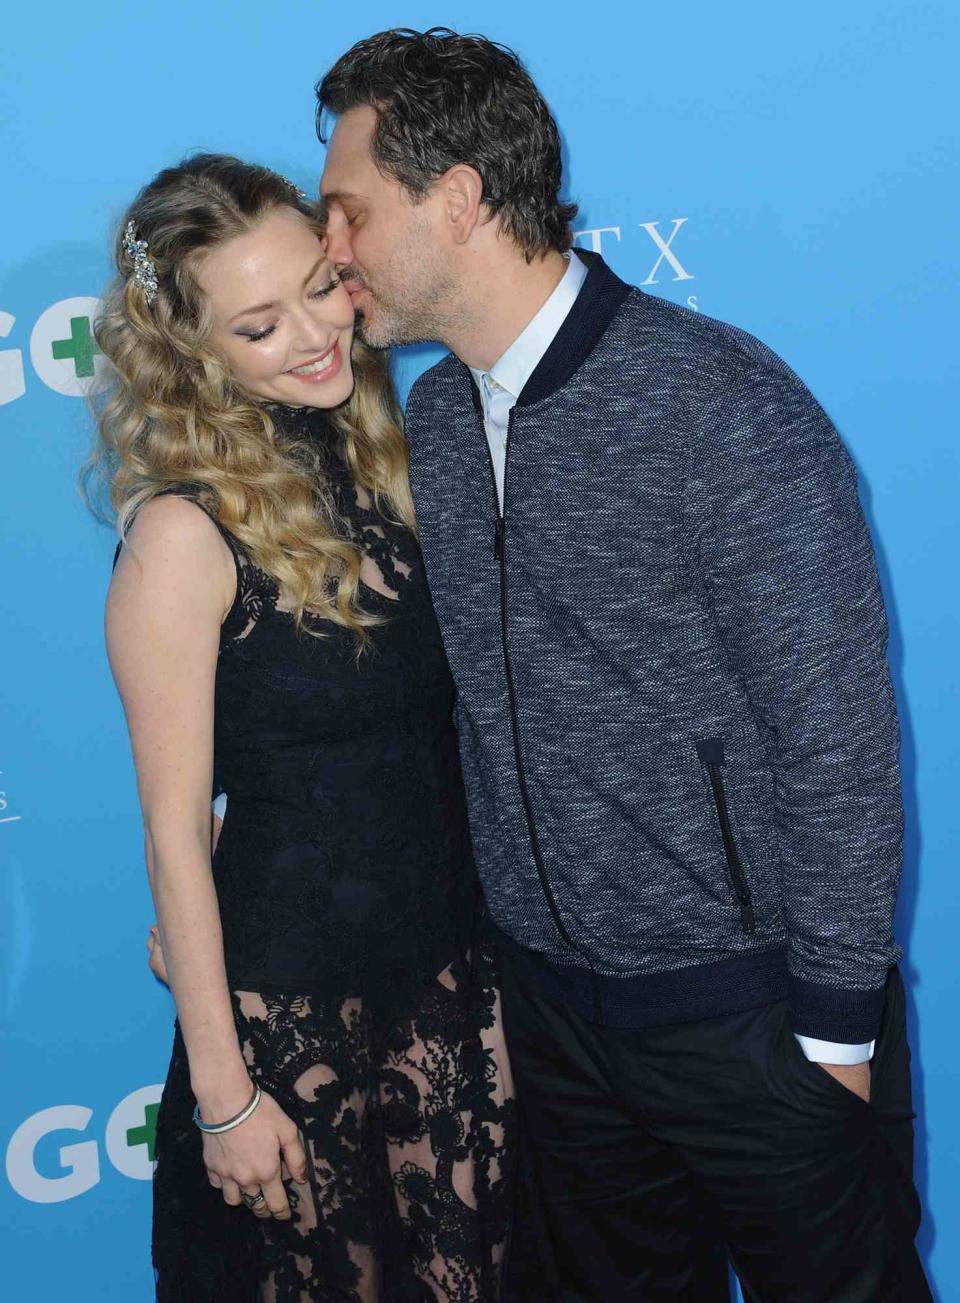 Amanda Seyfried and actor Thomas Sadoski arrive for the Premiere Of Amazon Studios And STX Films' "Gringo" held at Regal LA Live Stadium 14 on March 6, 2018 in Los Angeles, California